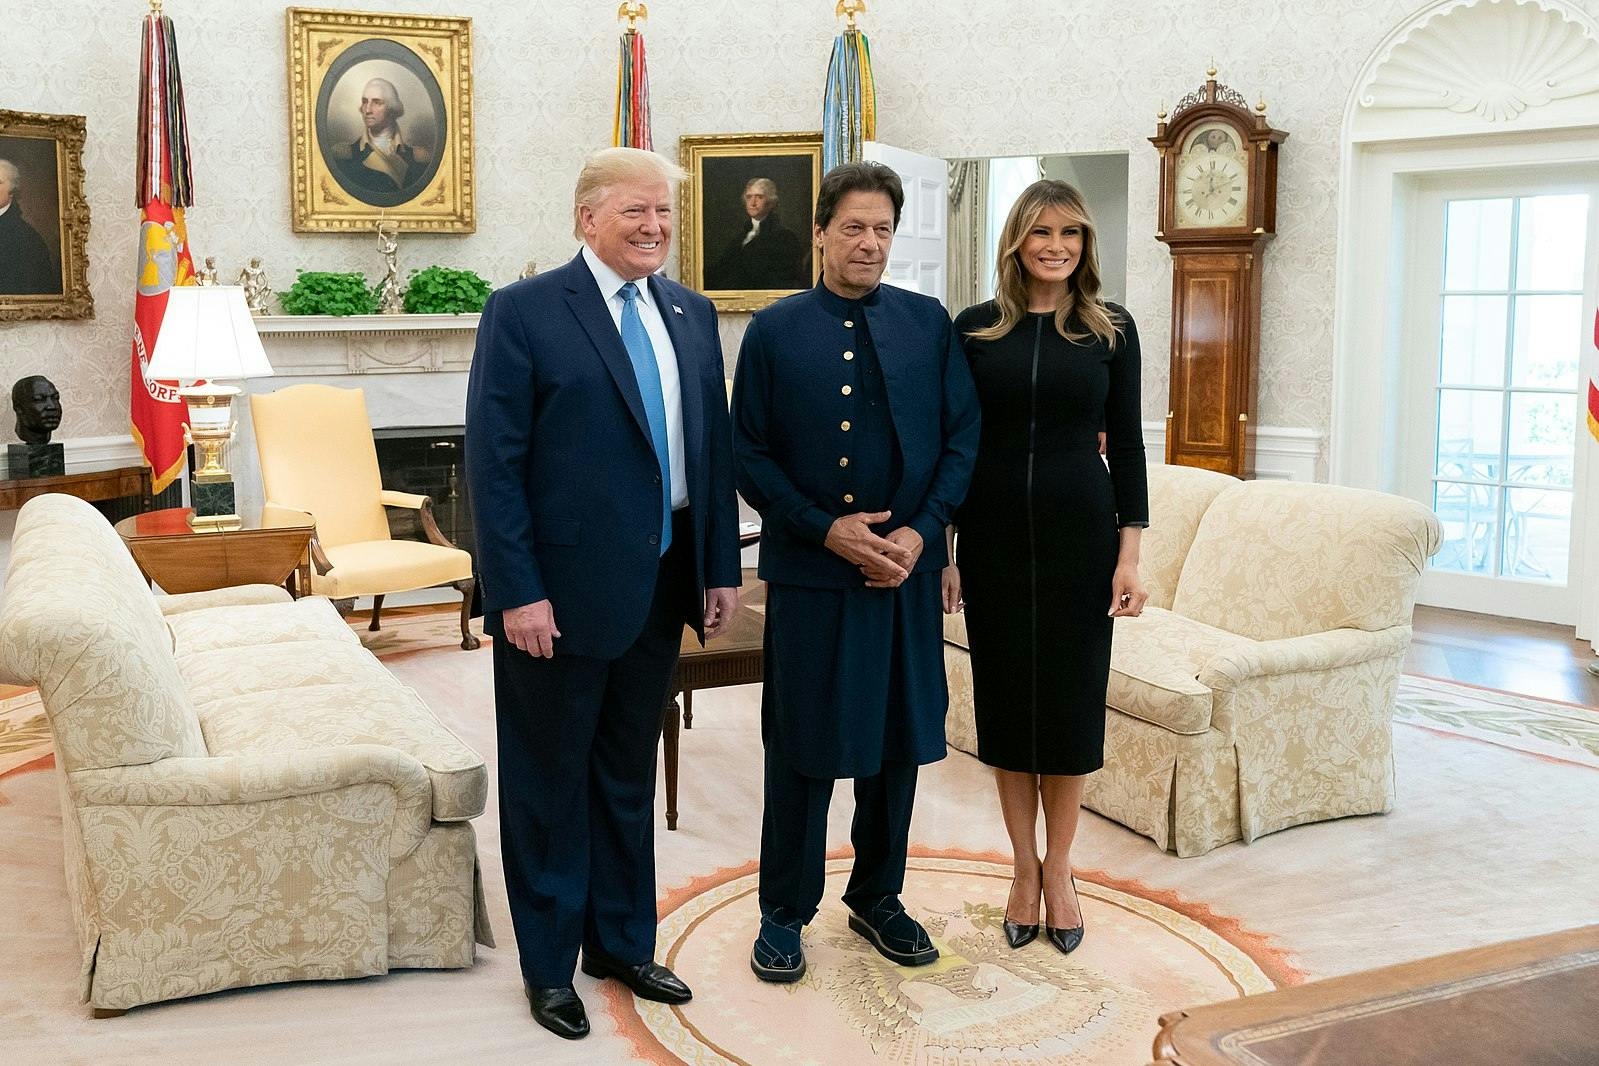 Donald J. Trump and Melania Trump pose for a photo with the Prime Minister of the Islamic Republic of Pakistan Imran Khan Monday, July 22, 2019, in the Oval Office of the White House. (Official White House Photo by Andrea Hanks, via Wikimedia Commons)
